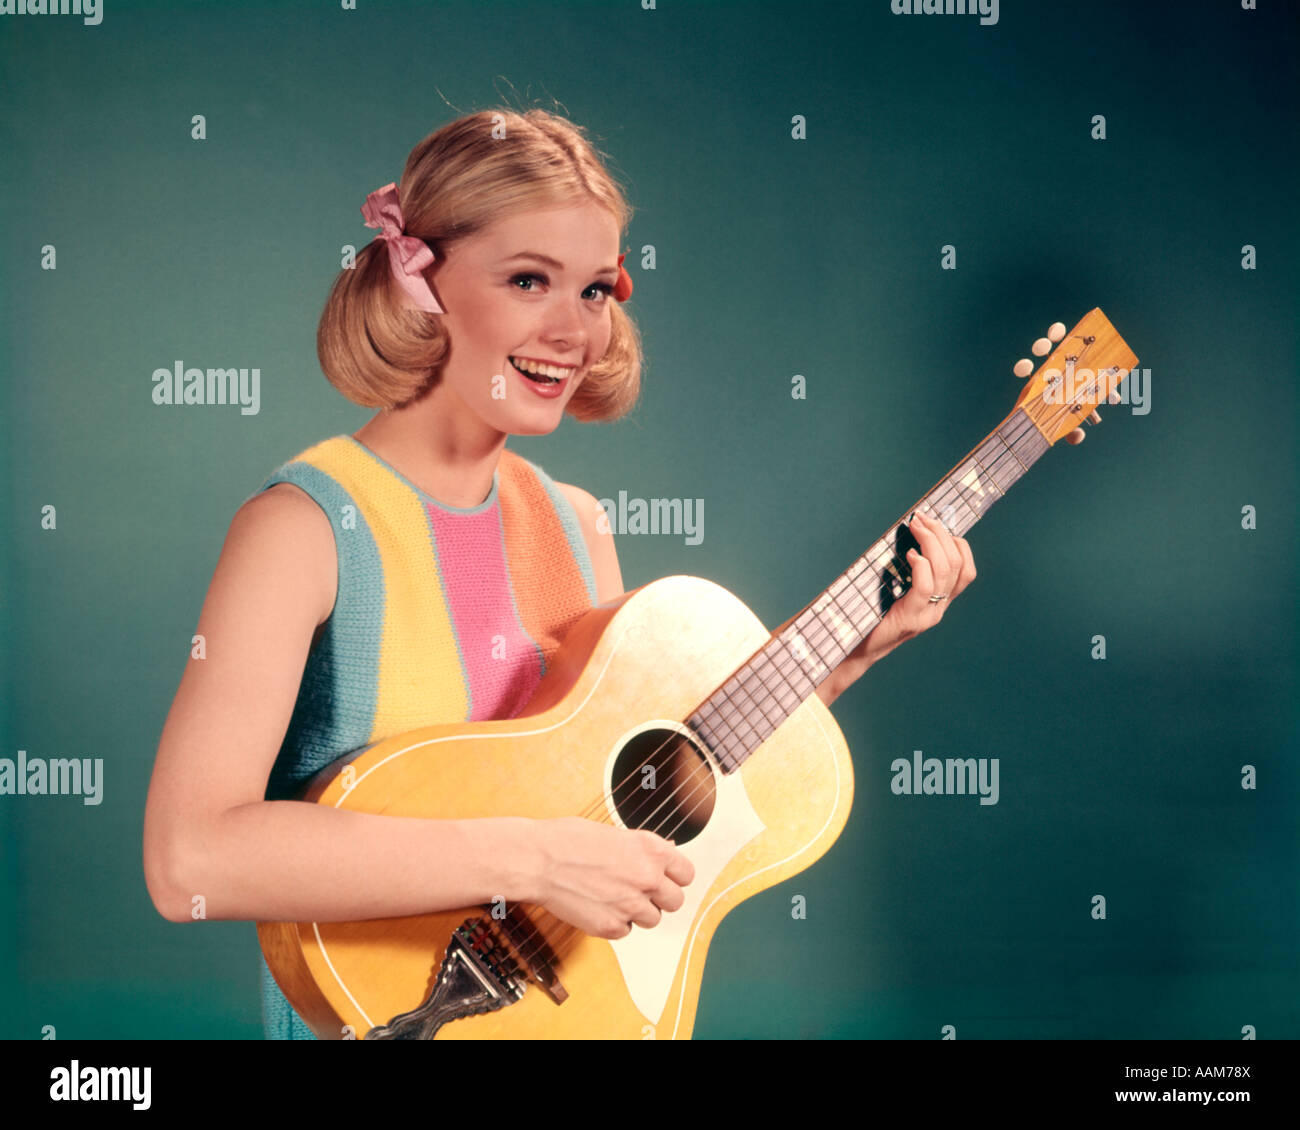 1960 1960s BLONDE YOUNG WOMAN PLAYING A GUITAR FOLKSINGER PERFORMER SMILING Stock Photo